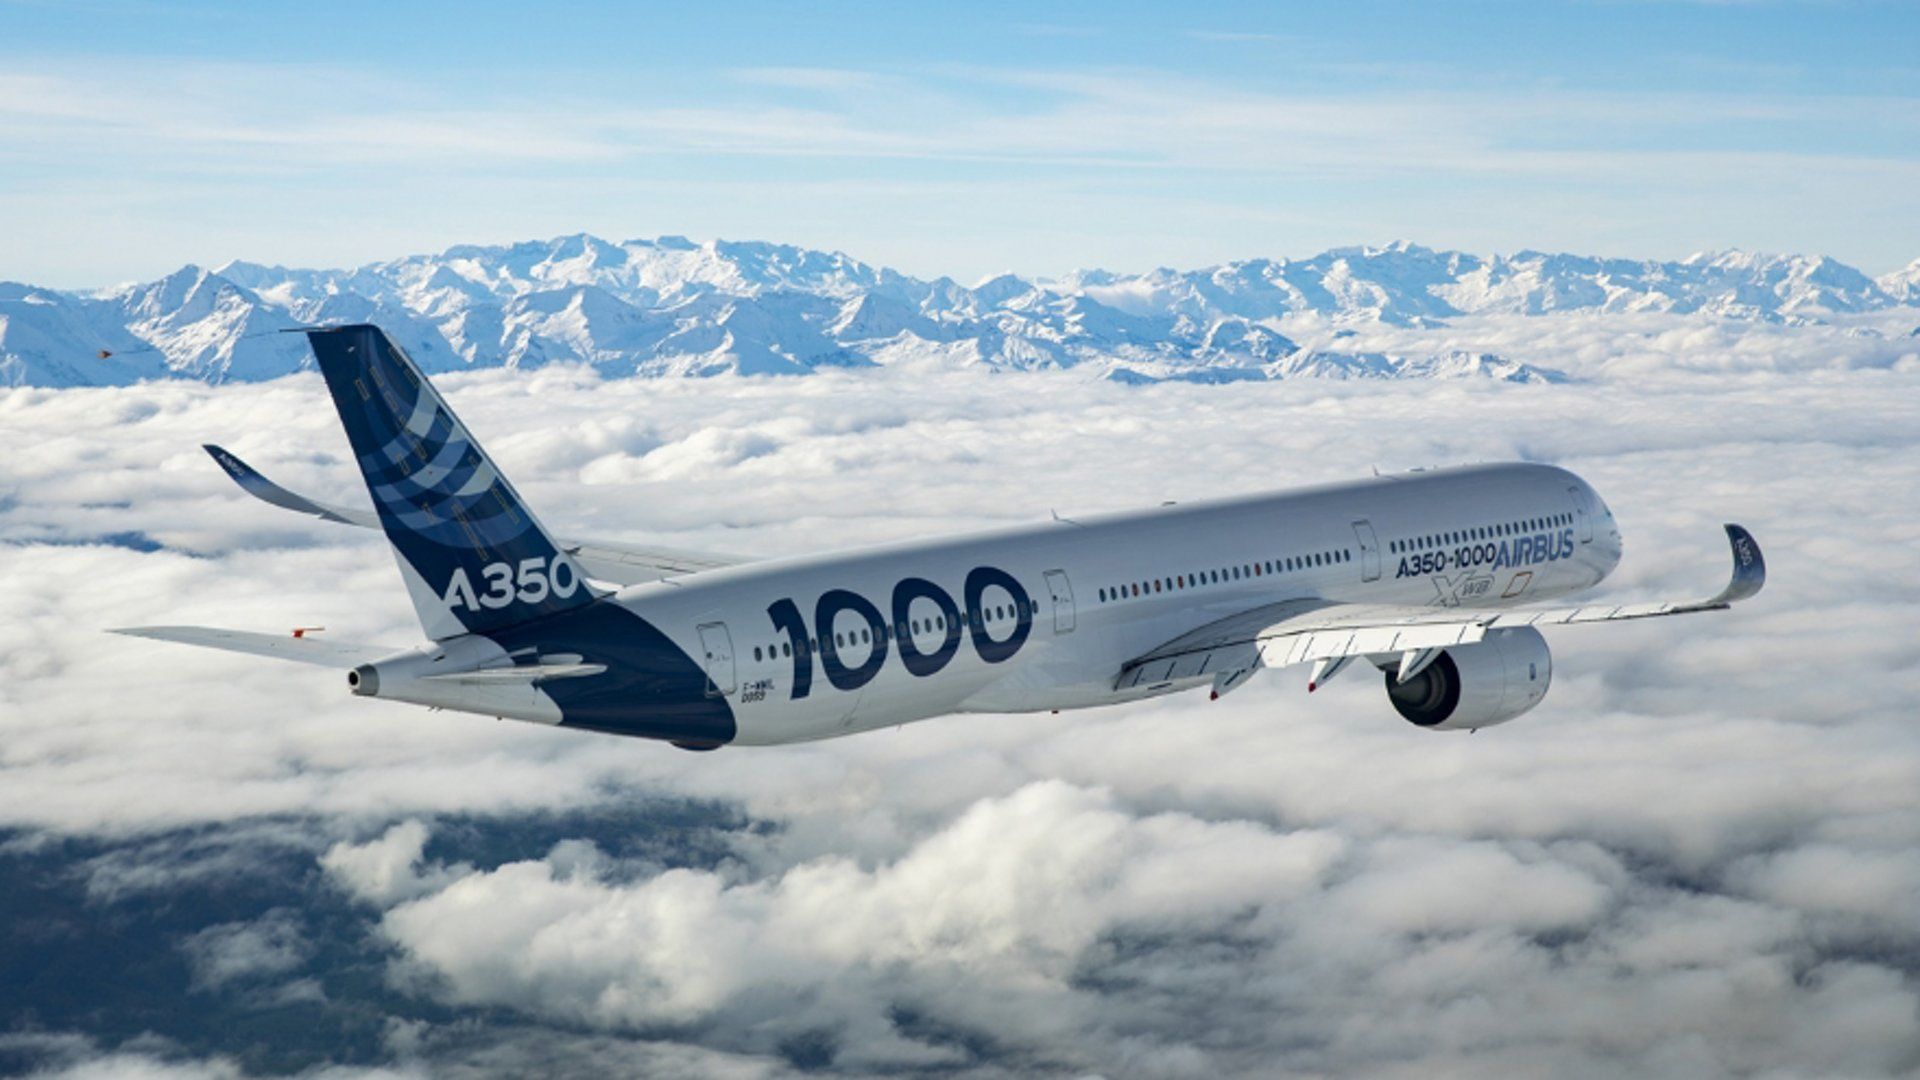 The Airbus A350-1000